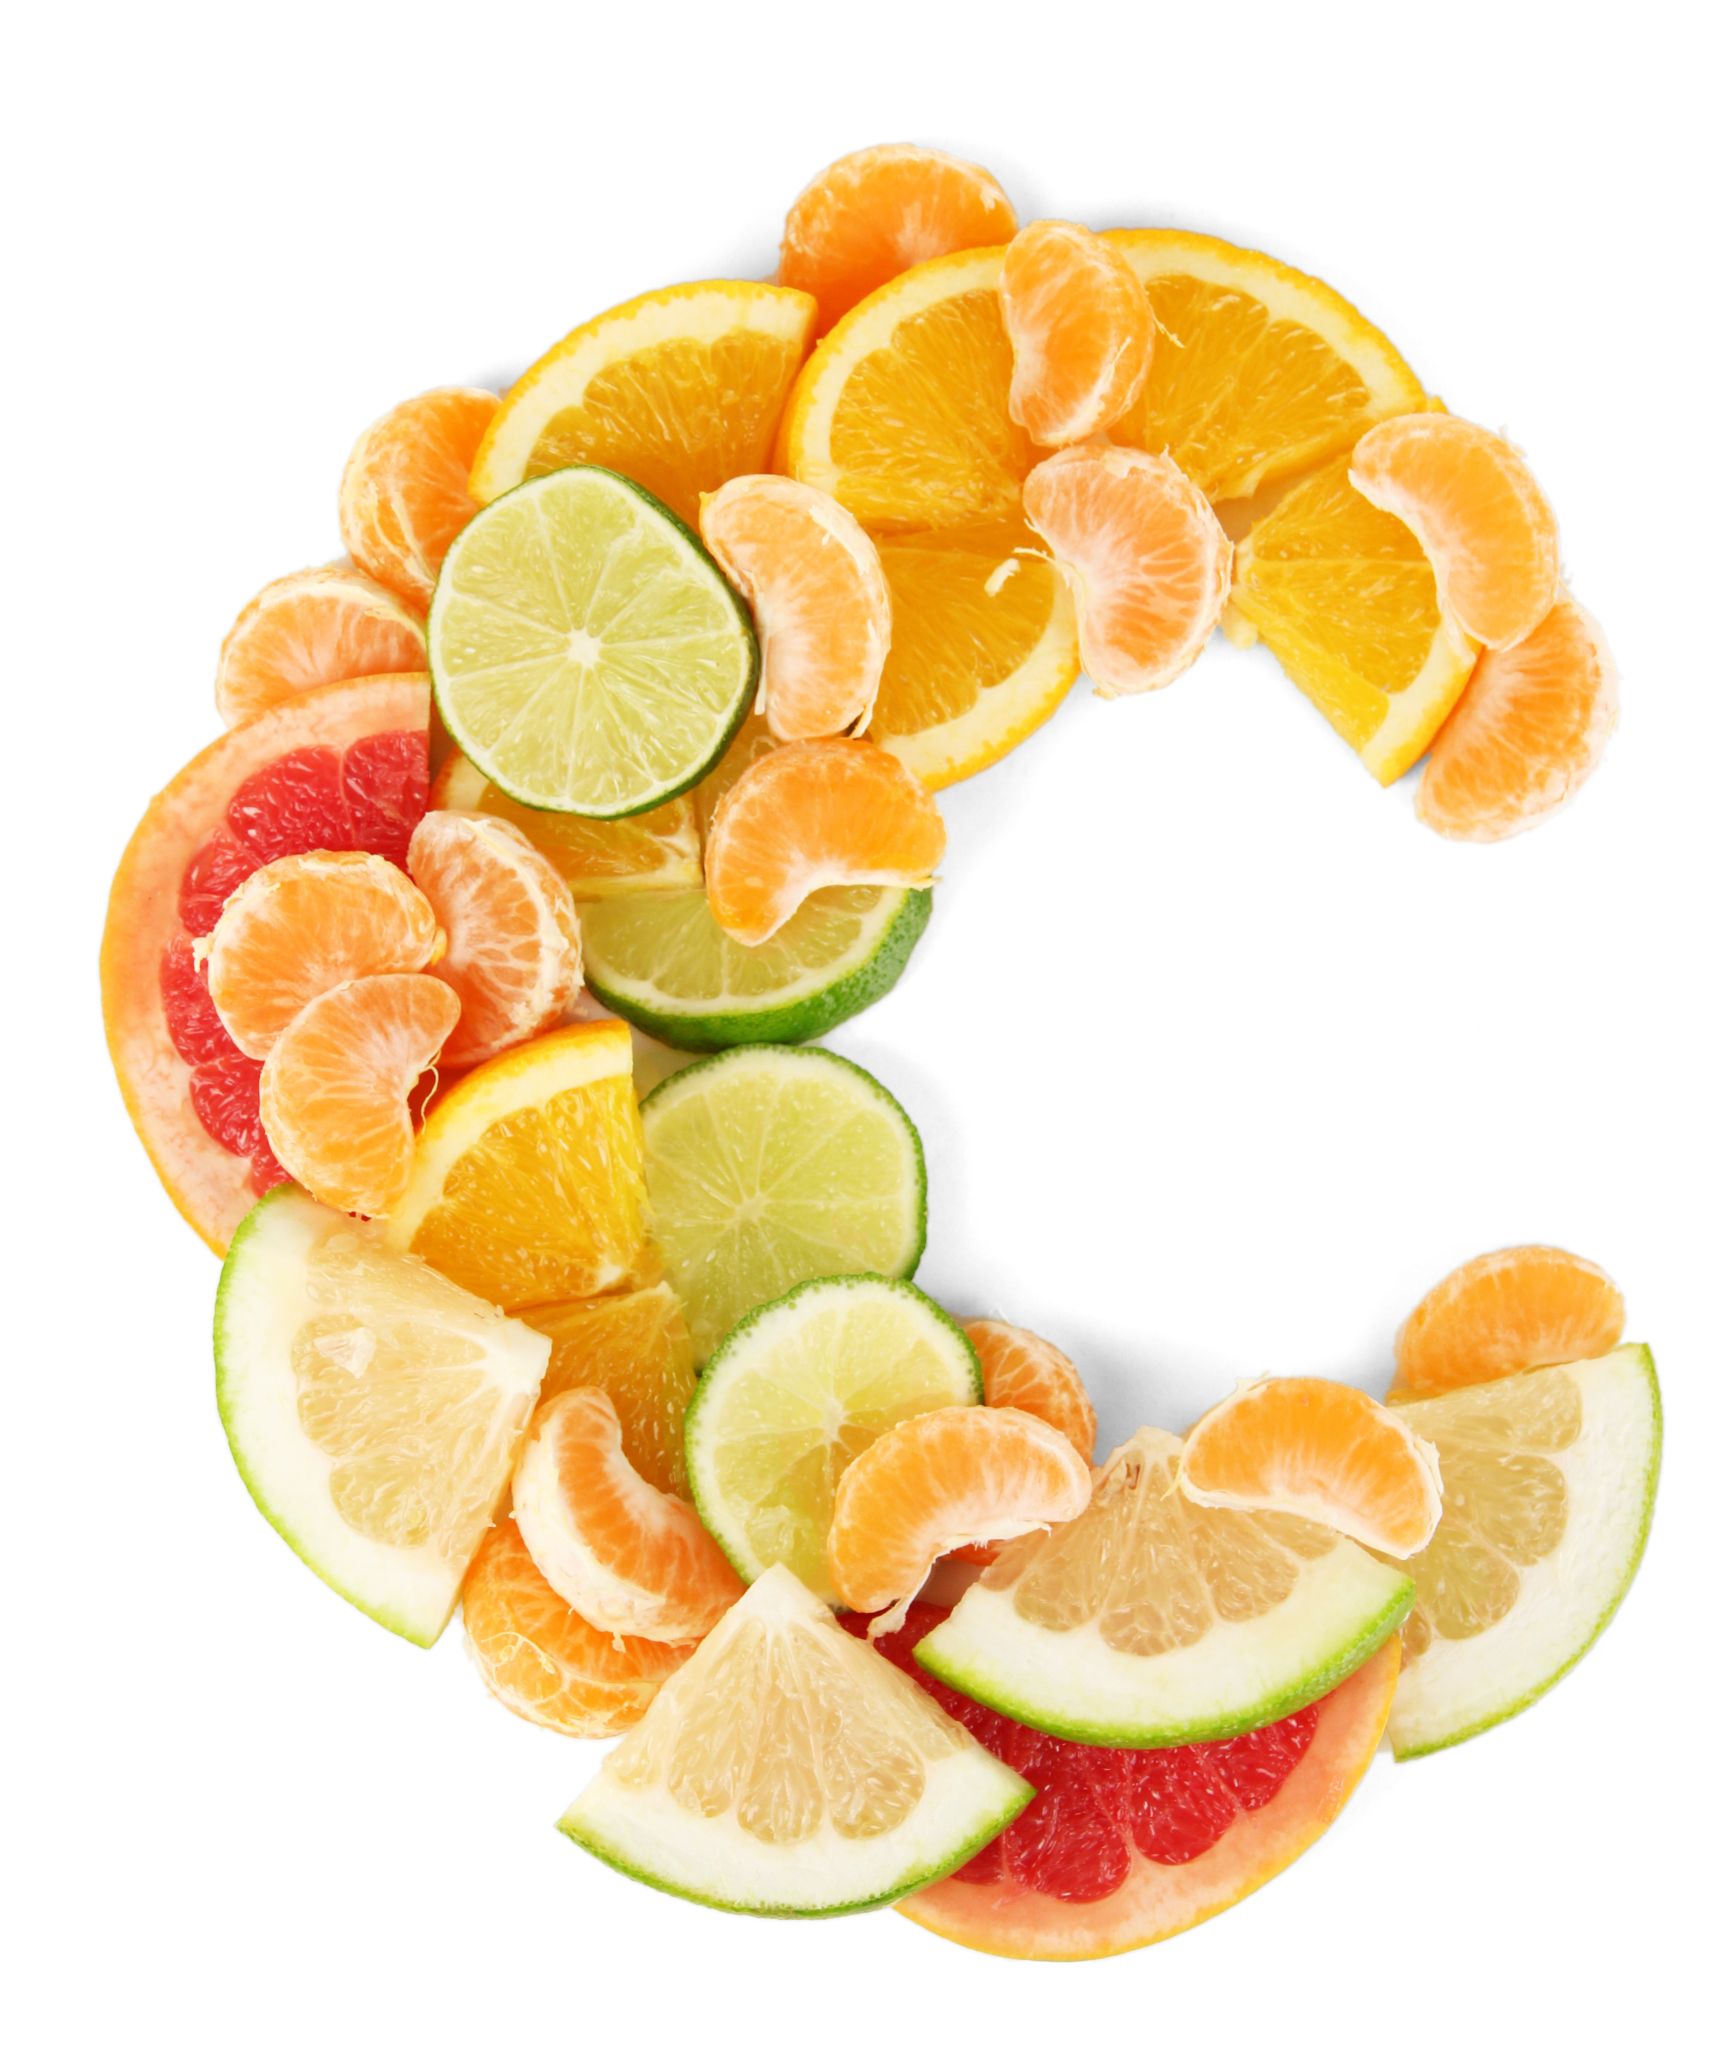 Add these 7 vitamin C rich superfoods to your diet to reduce stress and anxiety